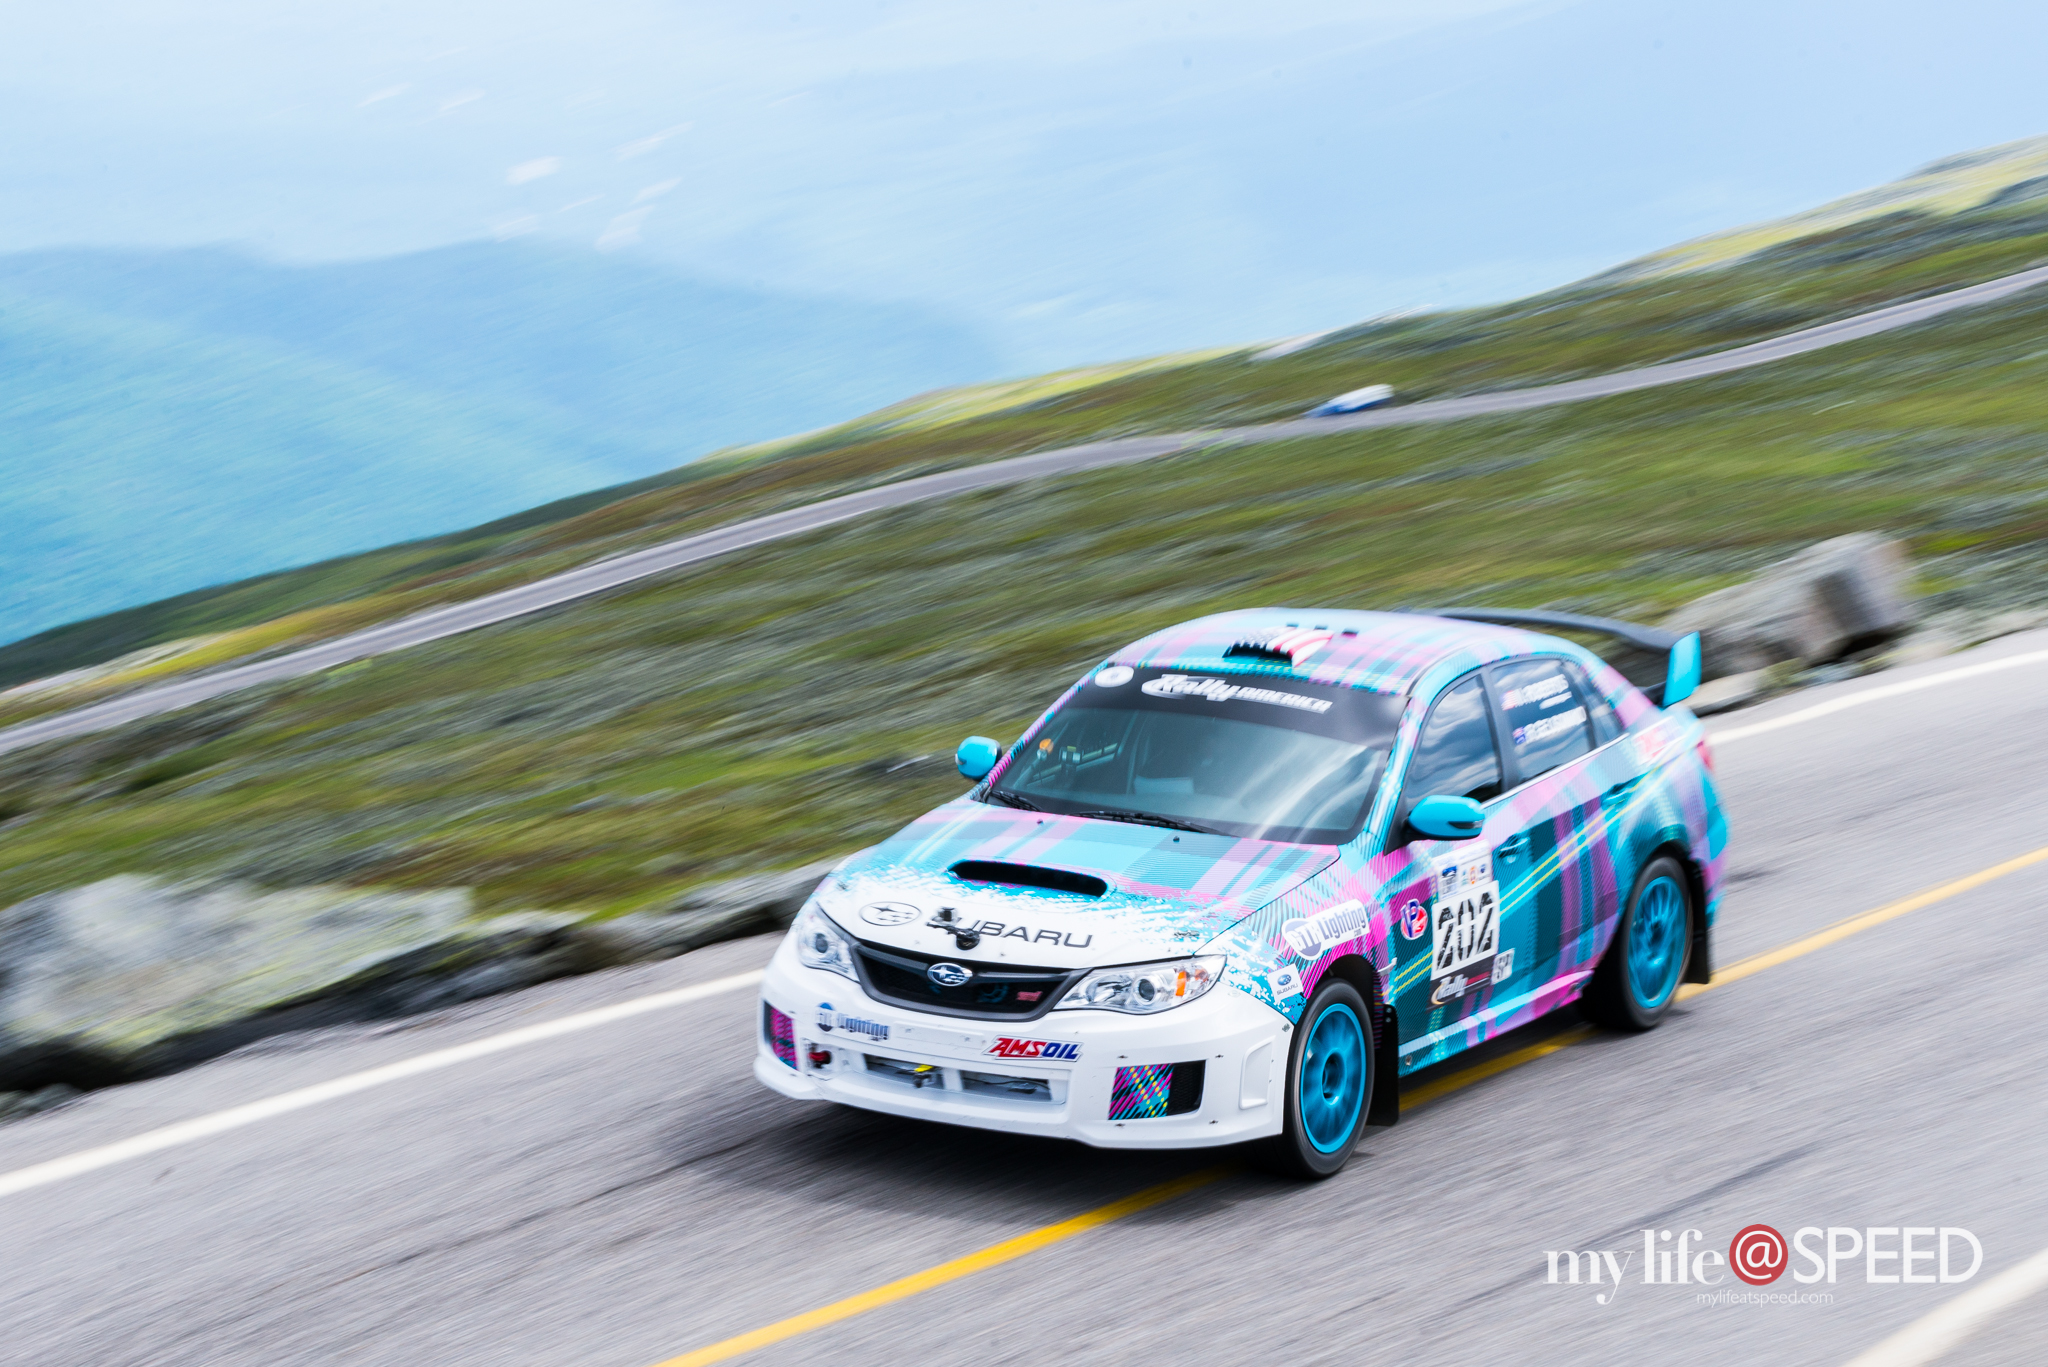 202 Nick Roberts 2014 Subaru STI back at it after ripping off the left rear wheel on practice day 2.